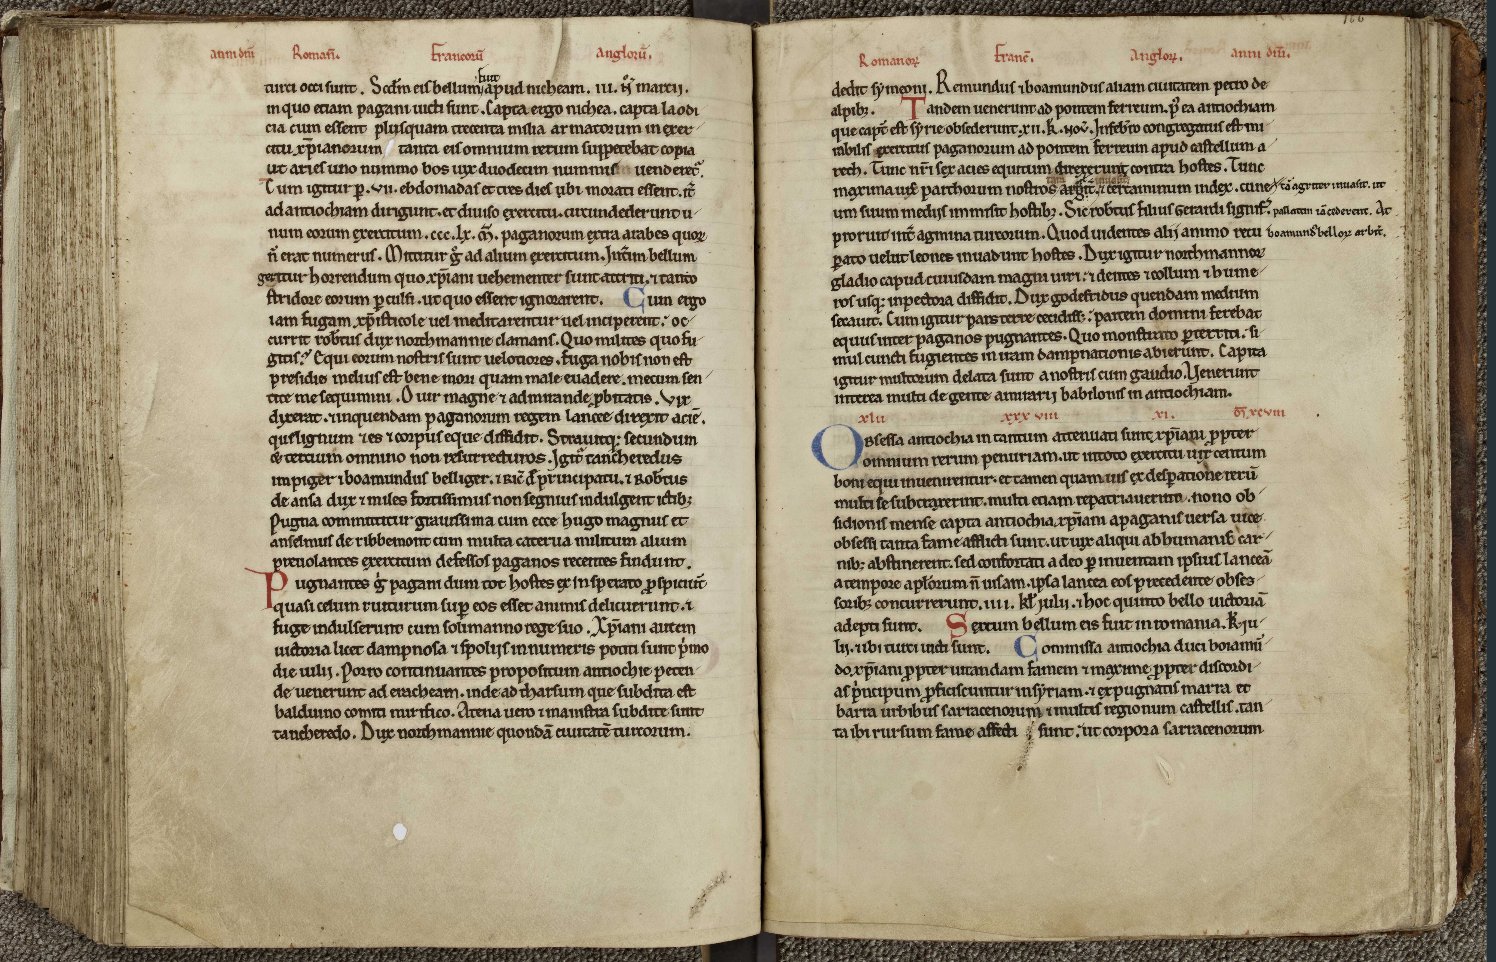 Archives départementales du Calvados  , Chronica Eusebii, Eusebius' chronicles. Codex comprising among others the Chronicle of Robert of Torigni (1110-1186),  which mentions the monastery at Mount St. Michel (12th c.), available here
